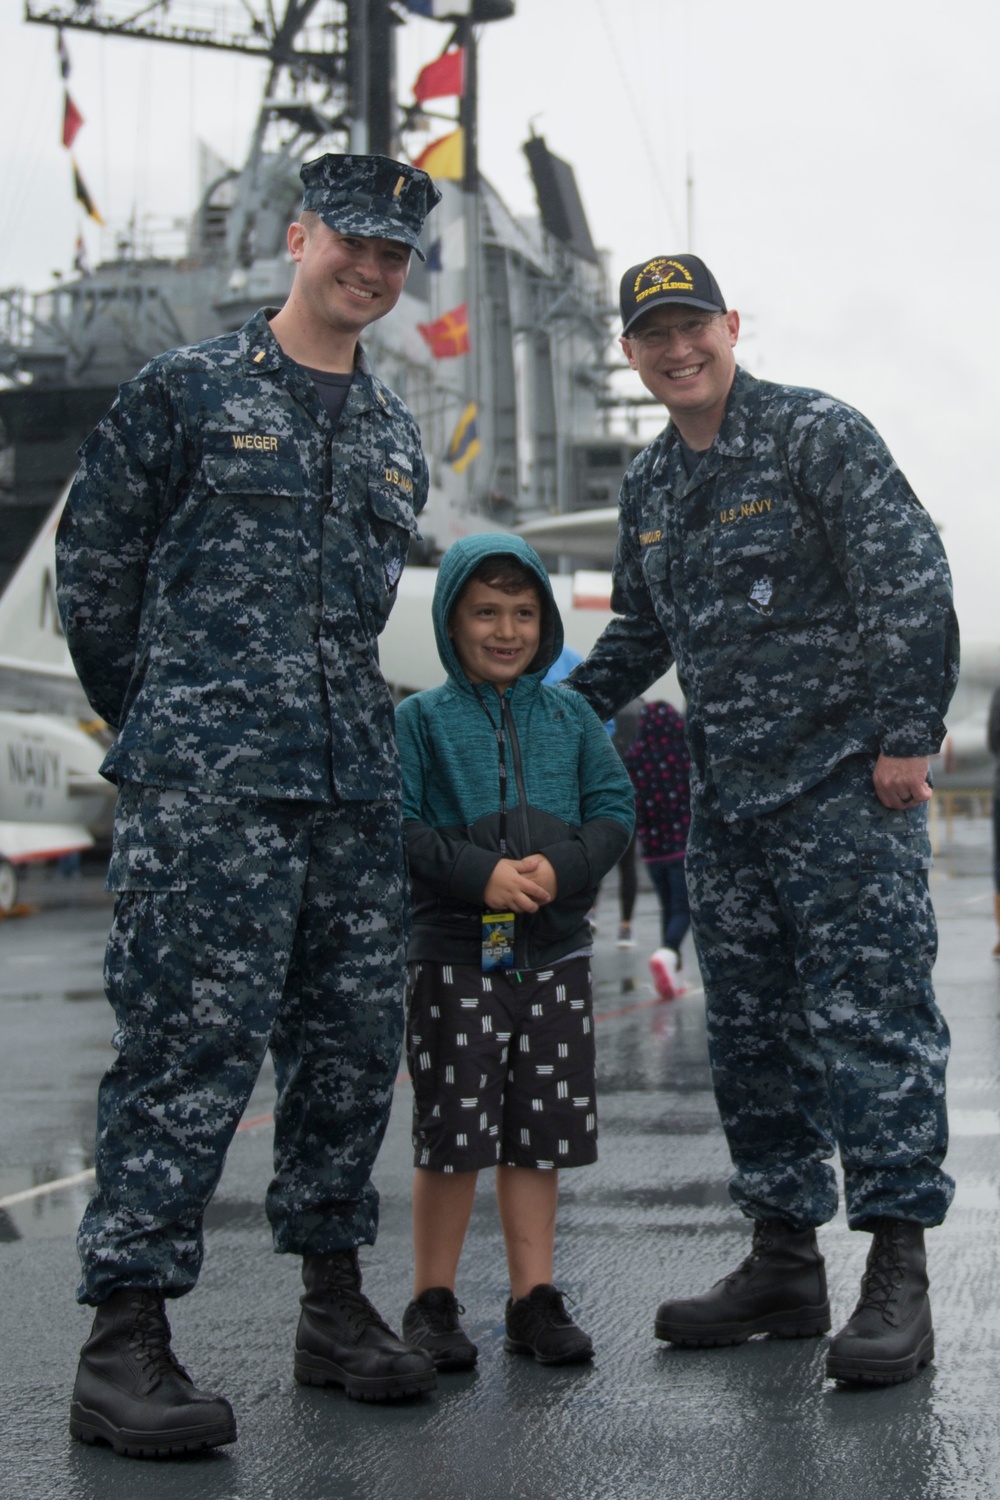 Sailors pose for photo with child